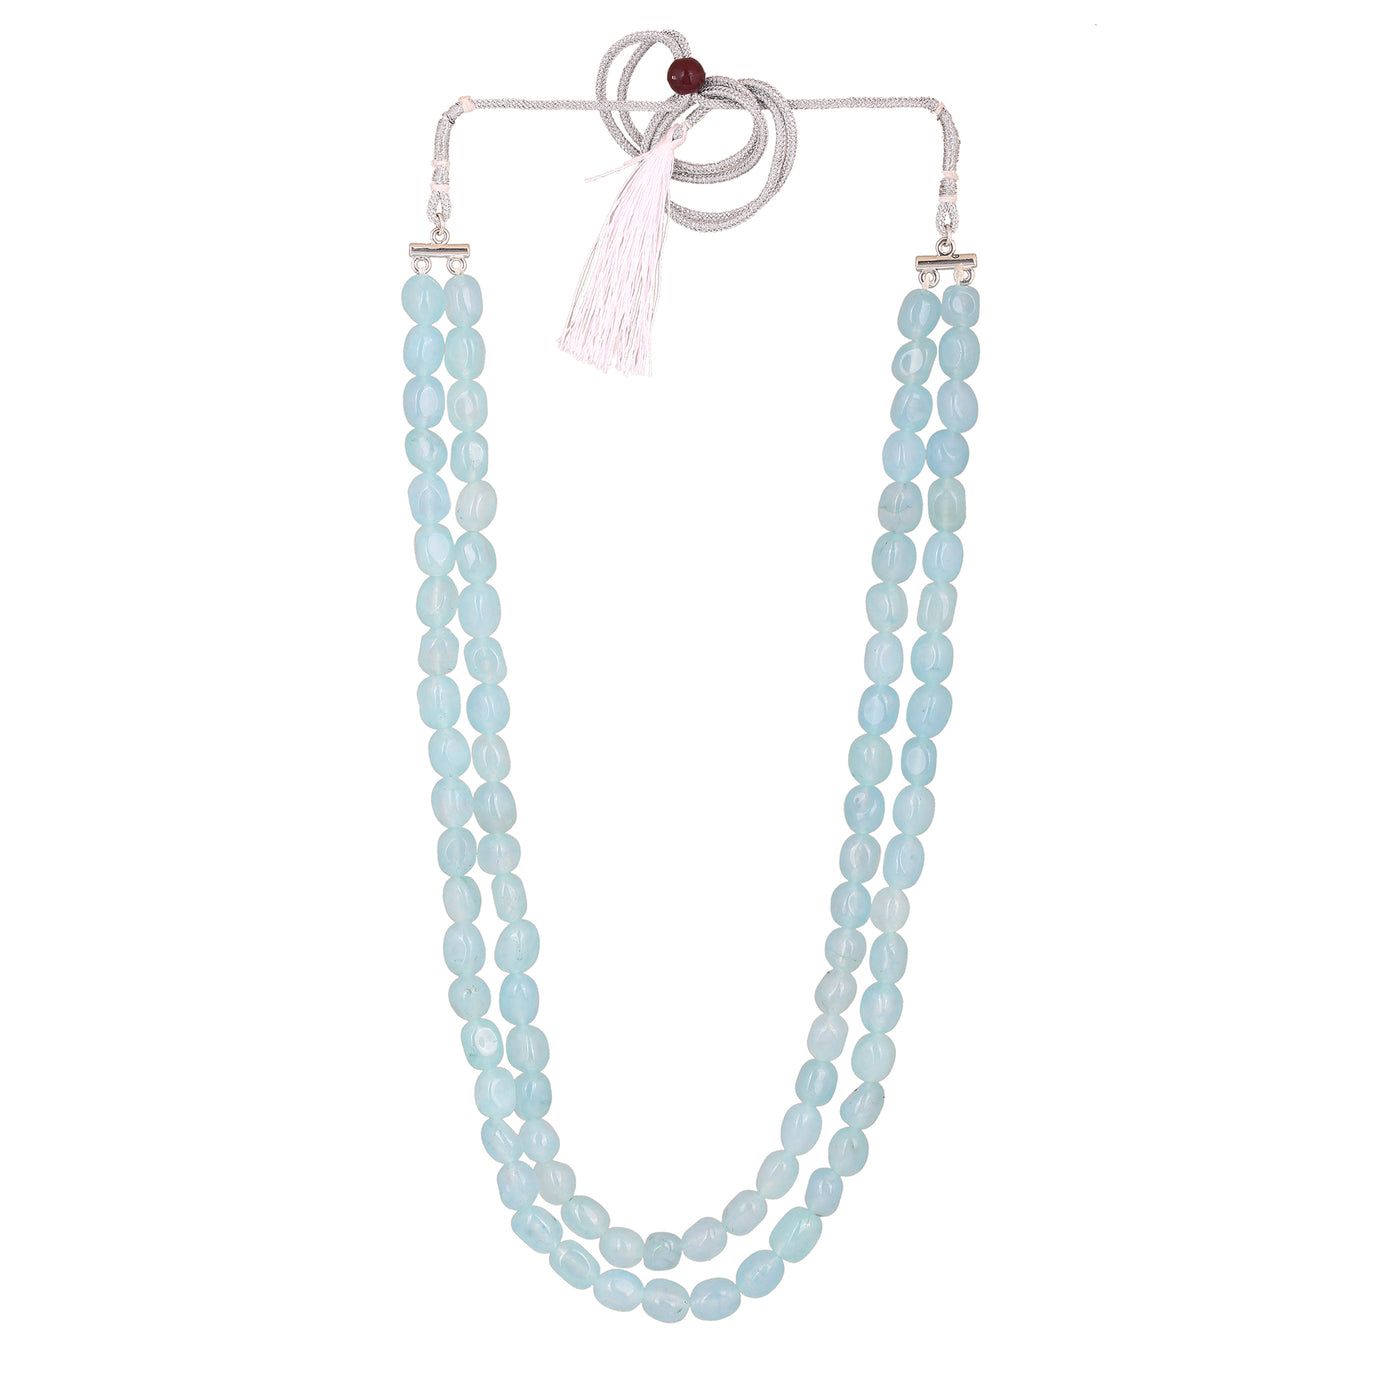 Estele Rhodium Plated Elegant Designer Double Layered Necklace with Mint Blue Beads for Girls and Women